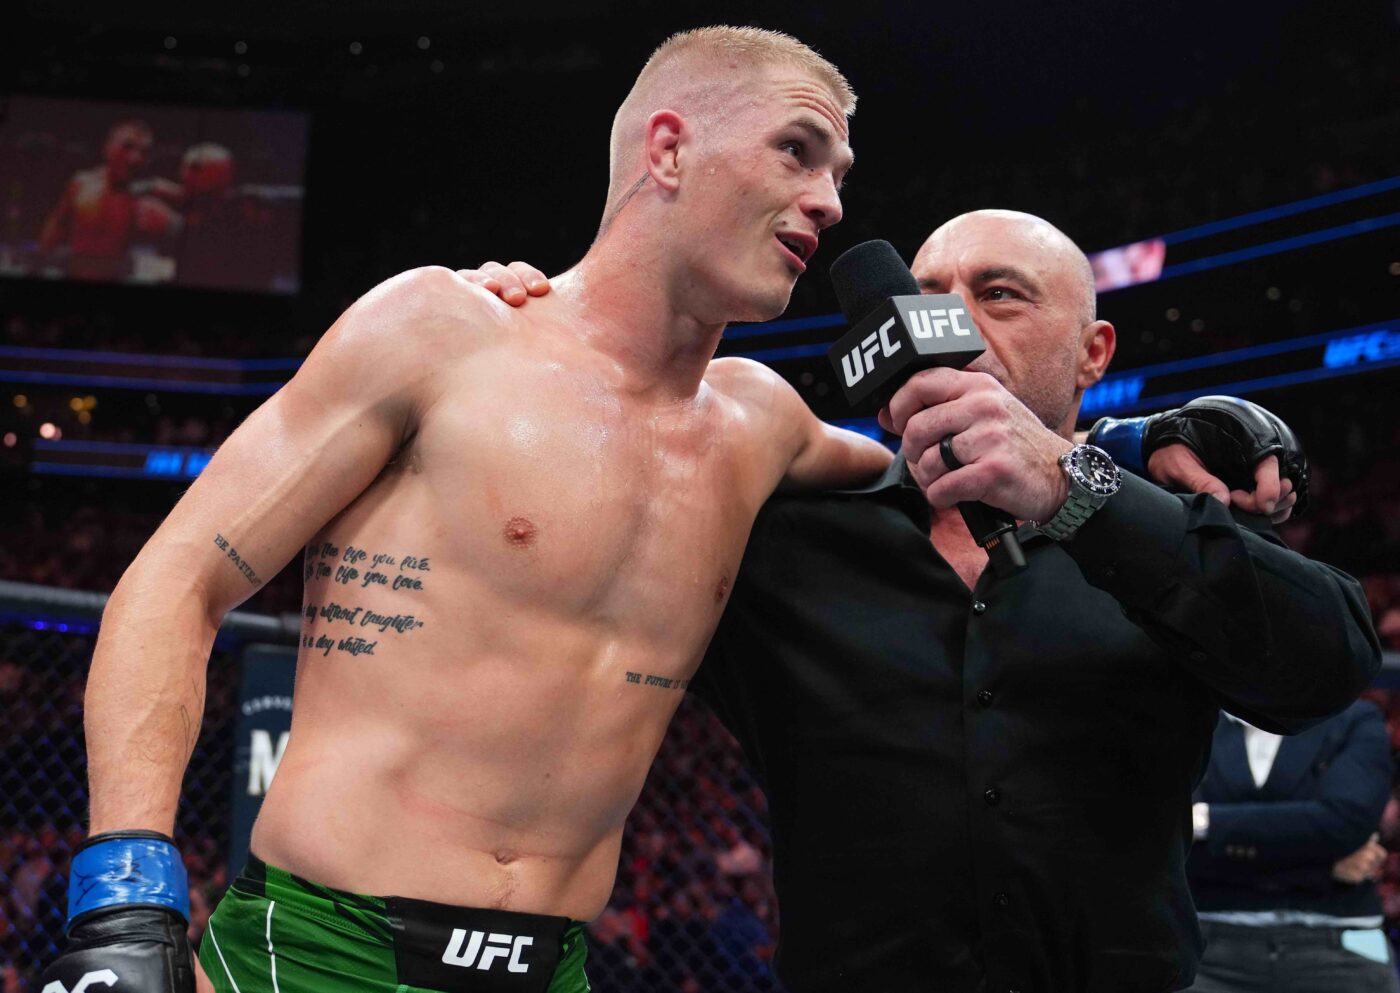 Ian Garry Challenges Colby Covington To An “I Quit Match” With A Devastating Forfeit